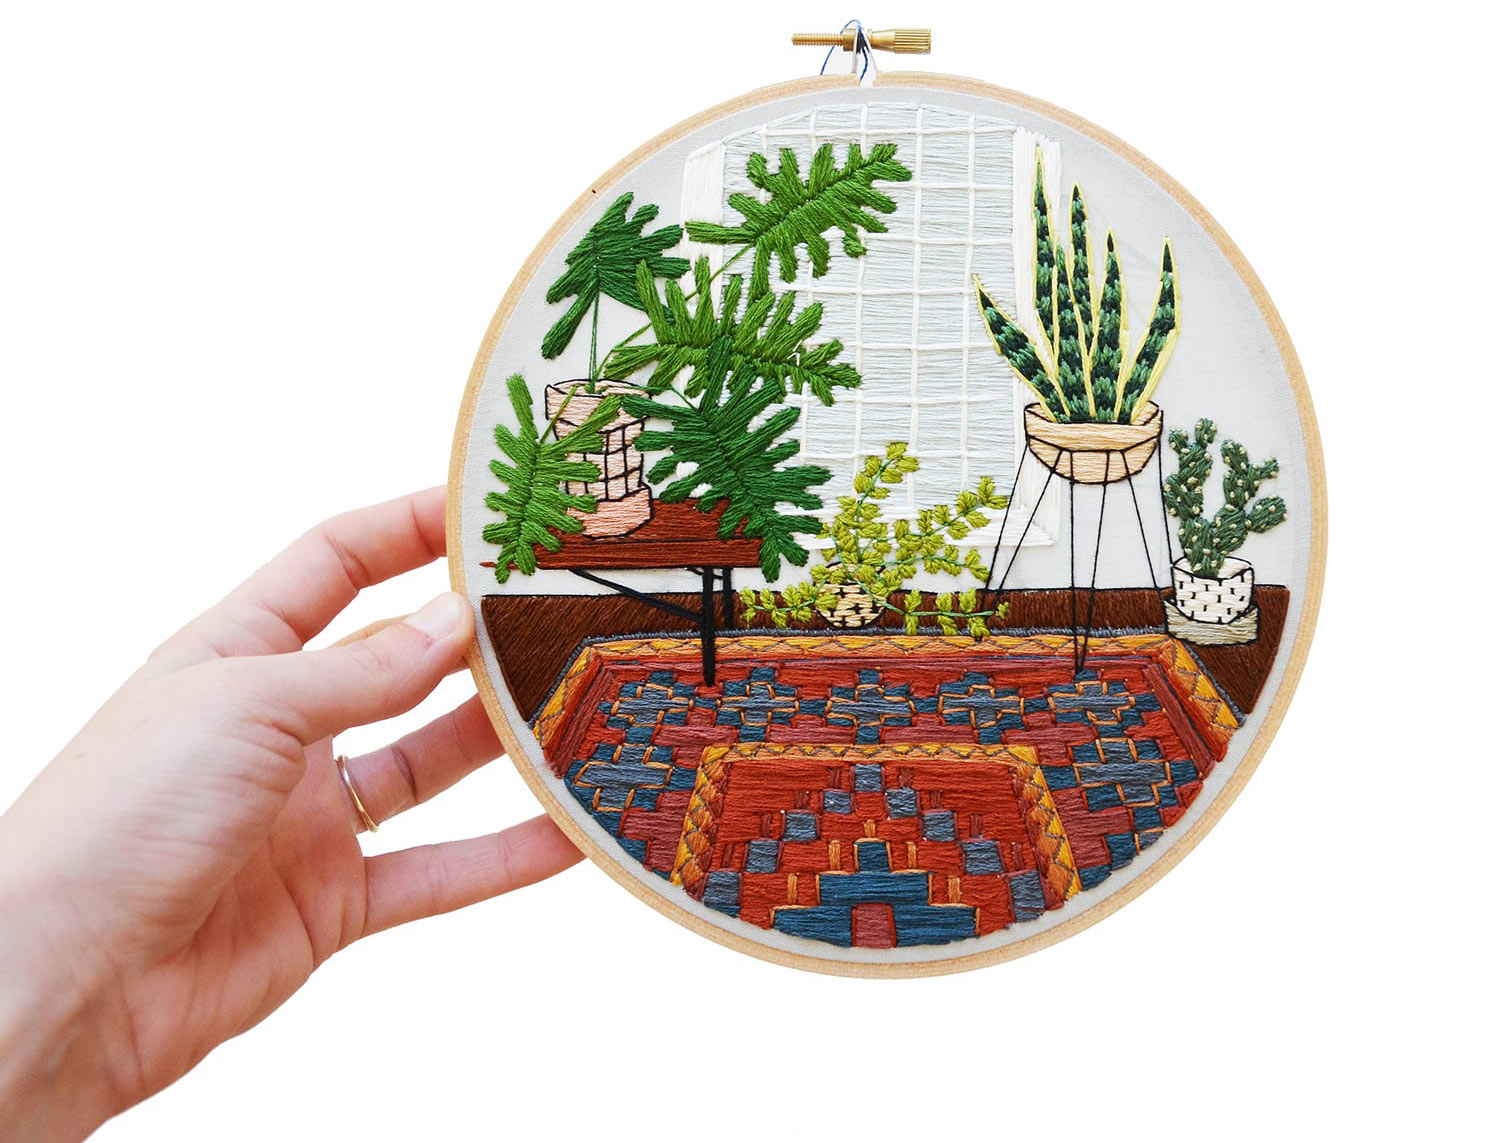 Embroidery by Sarah K. Benning